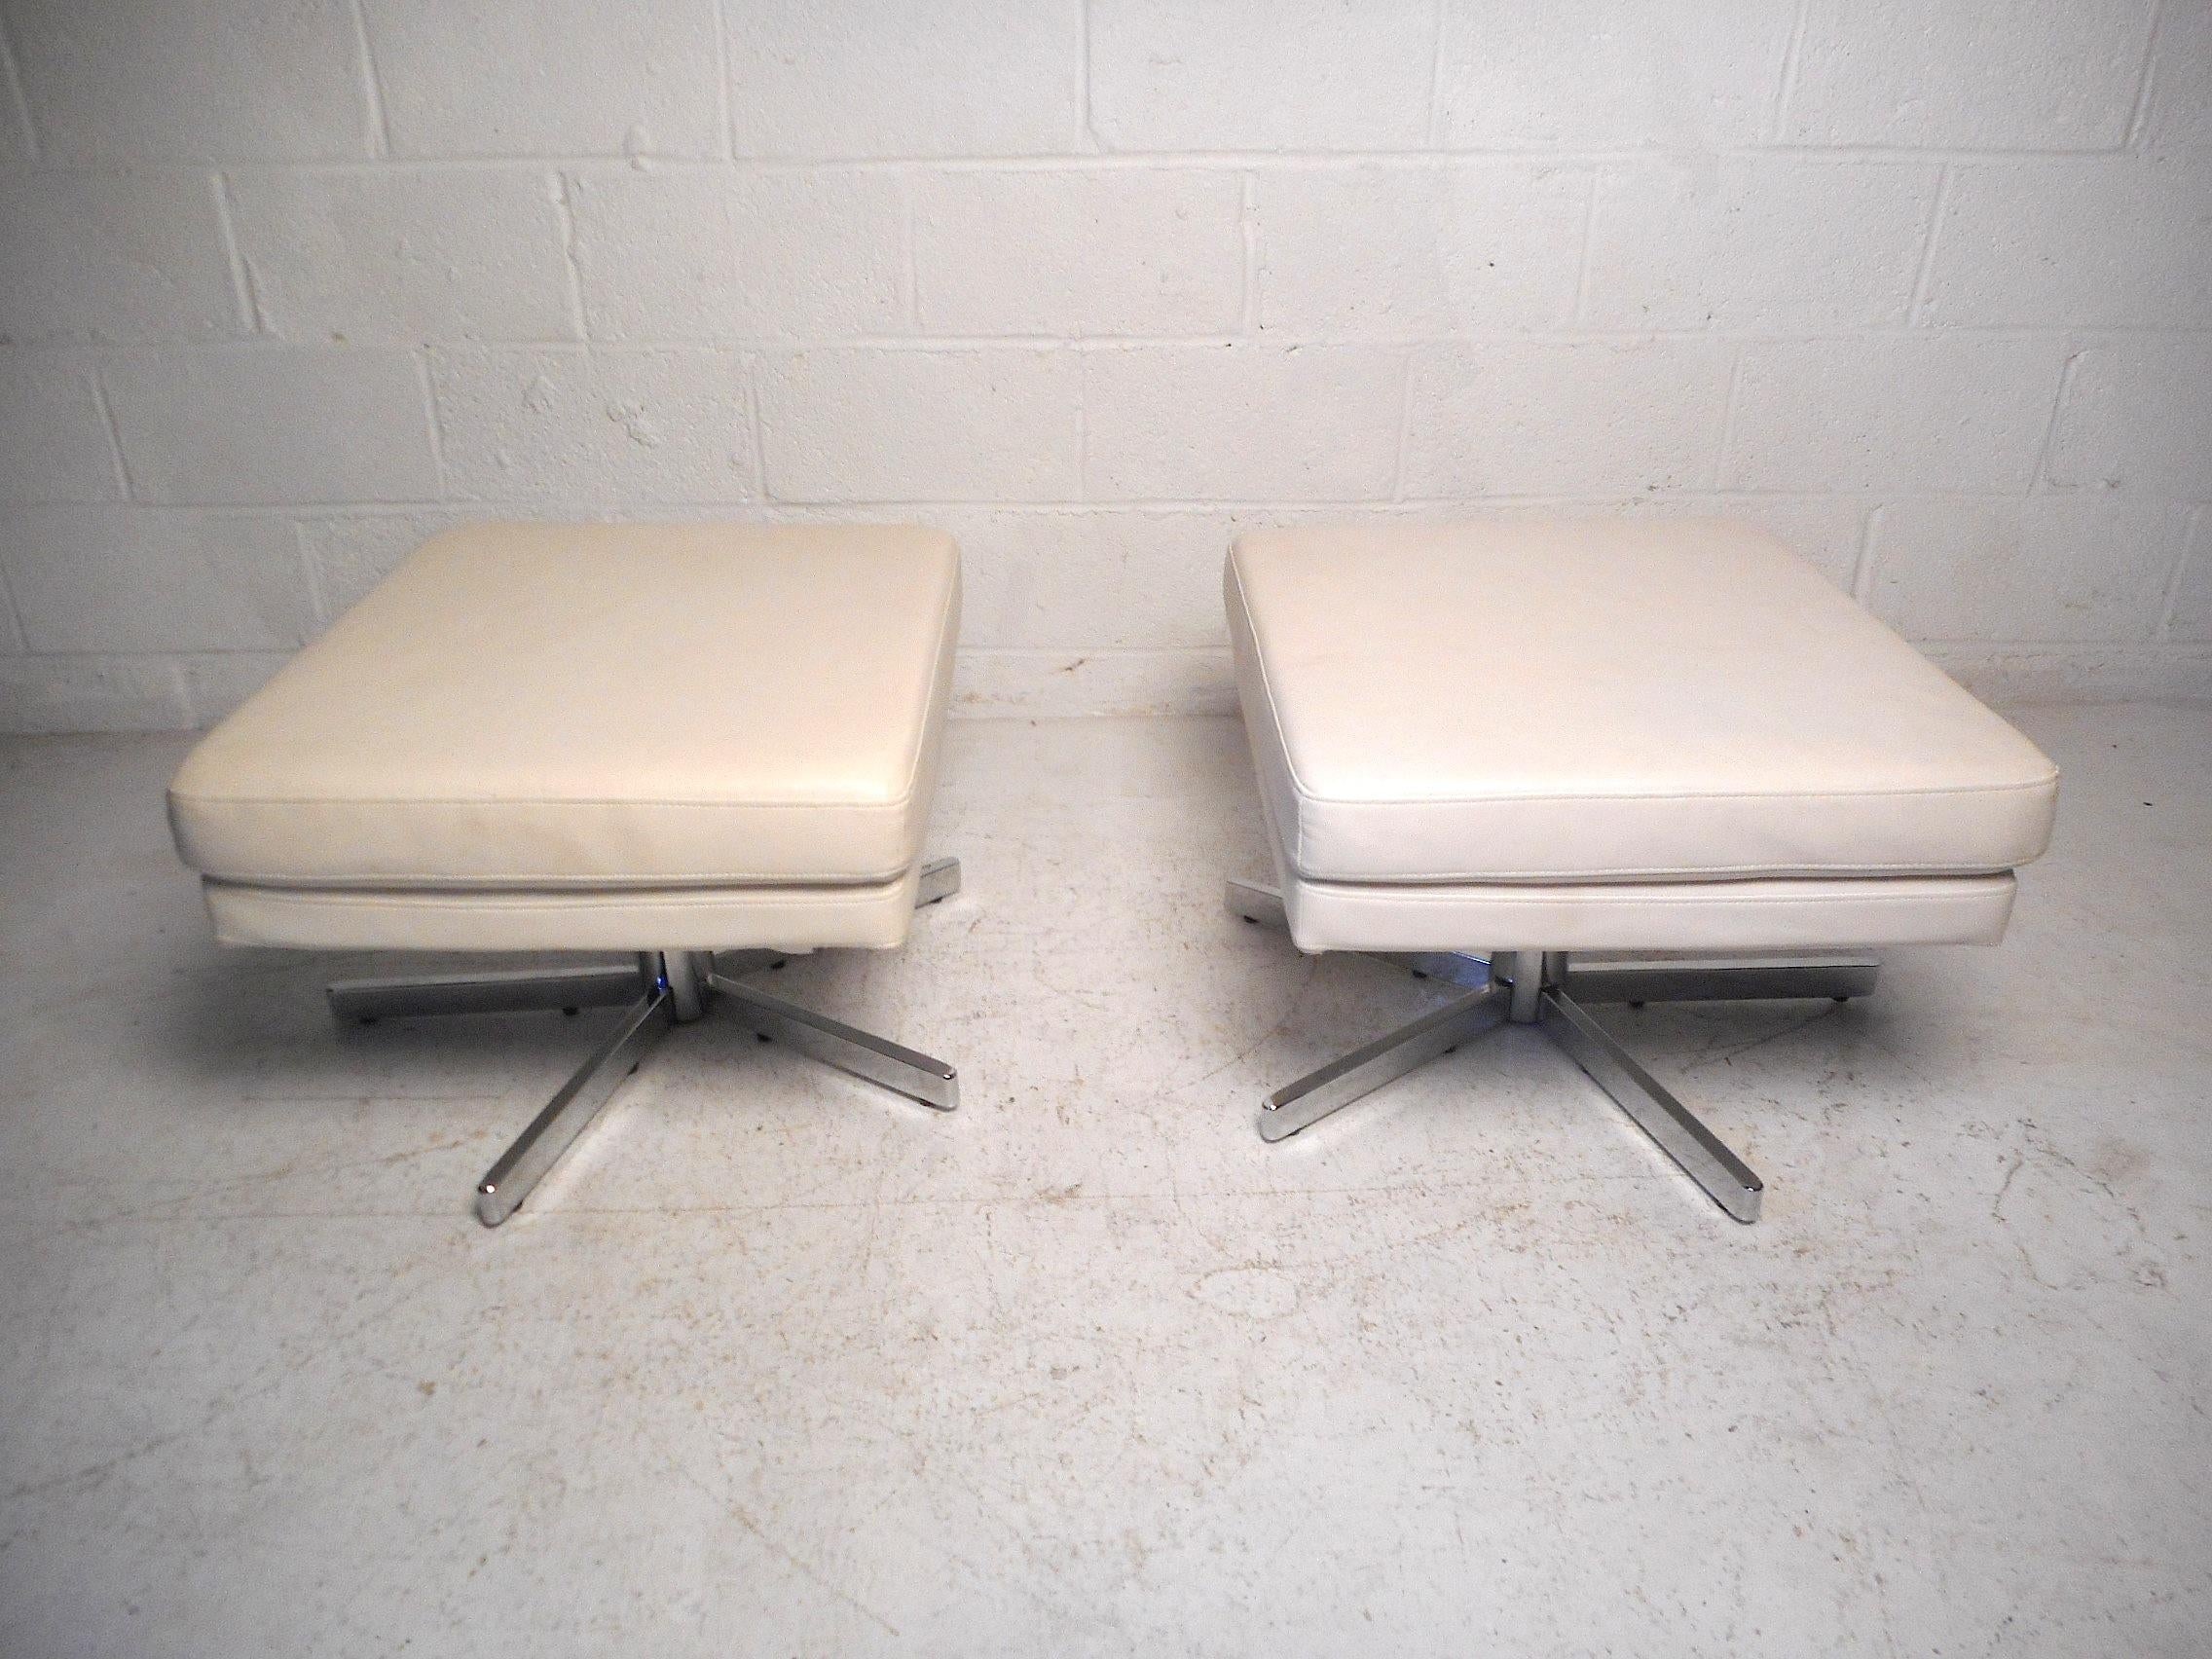 Pair of Midcentury Swiveling Ottomans In Good Condition For Sale In Brooklyn, NY